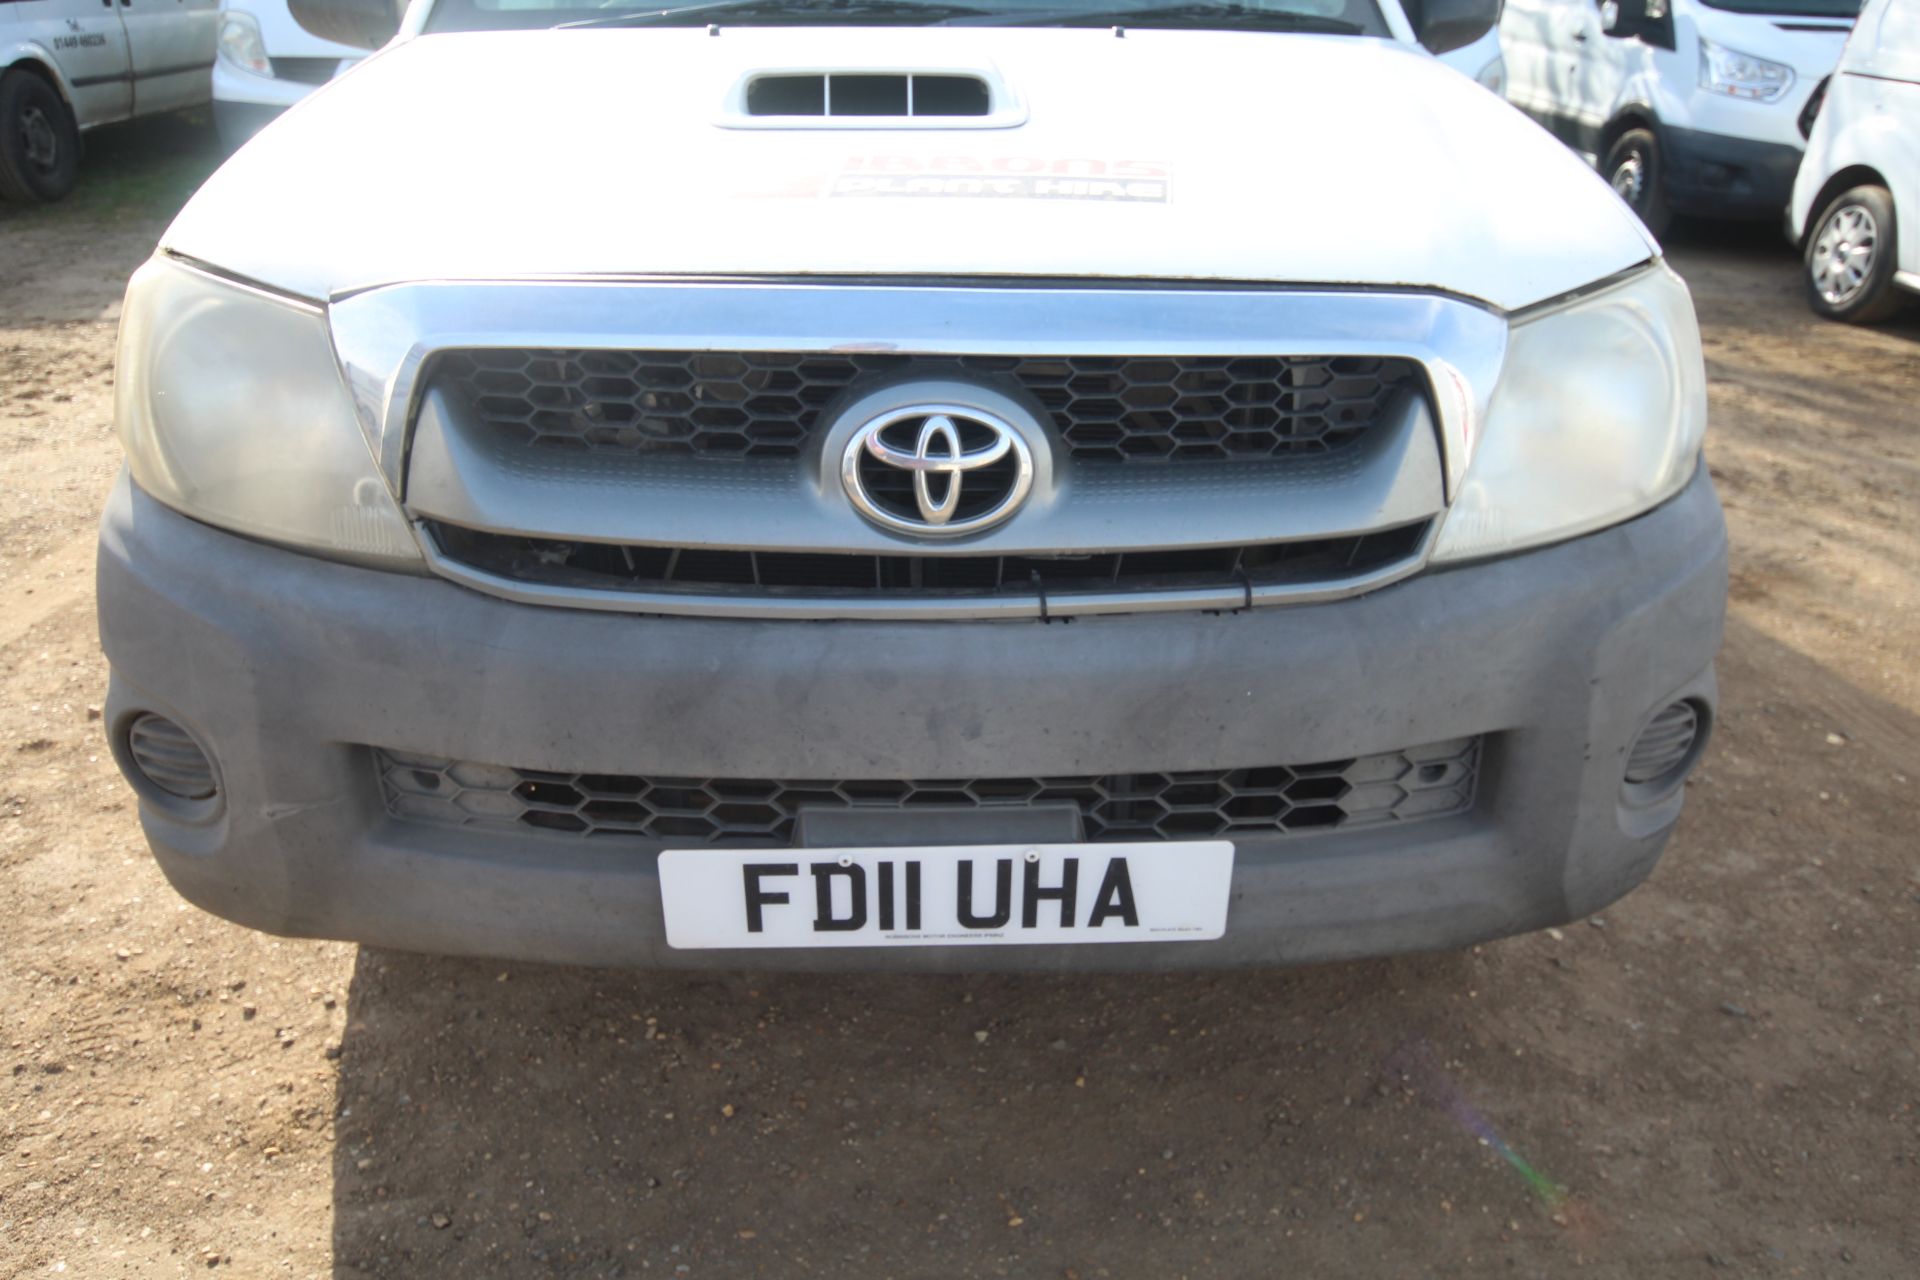 Toyota Hilux 2.5L diesel manual double cab pick-up. Registration FD11 UHA. Date of first - Image 4 of 58